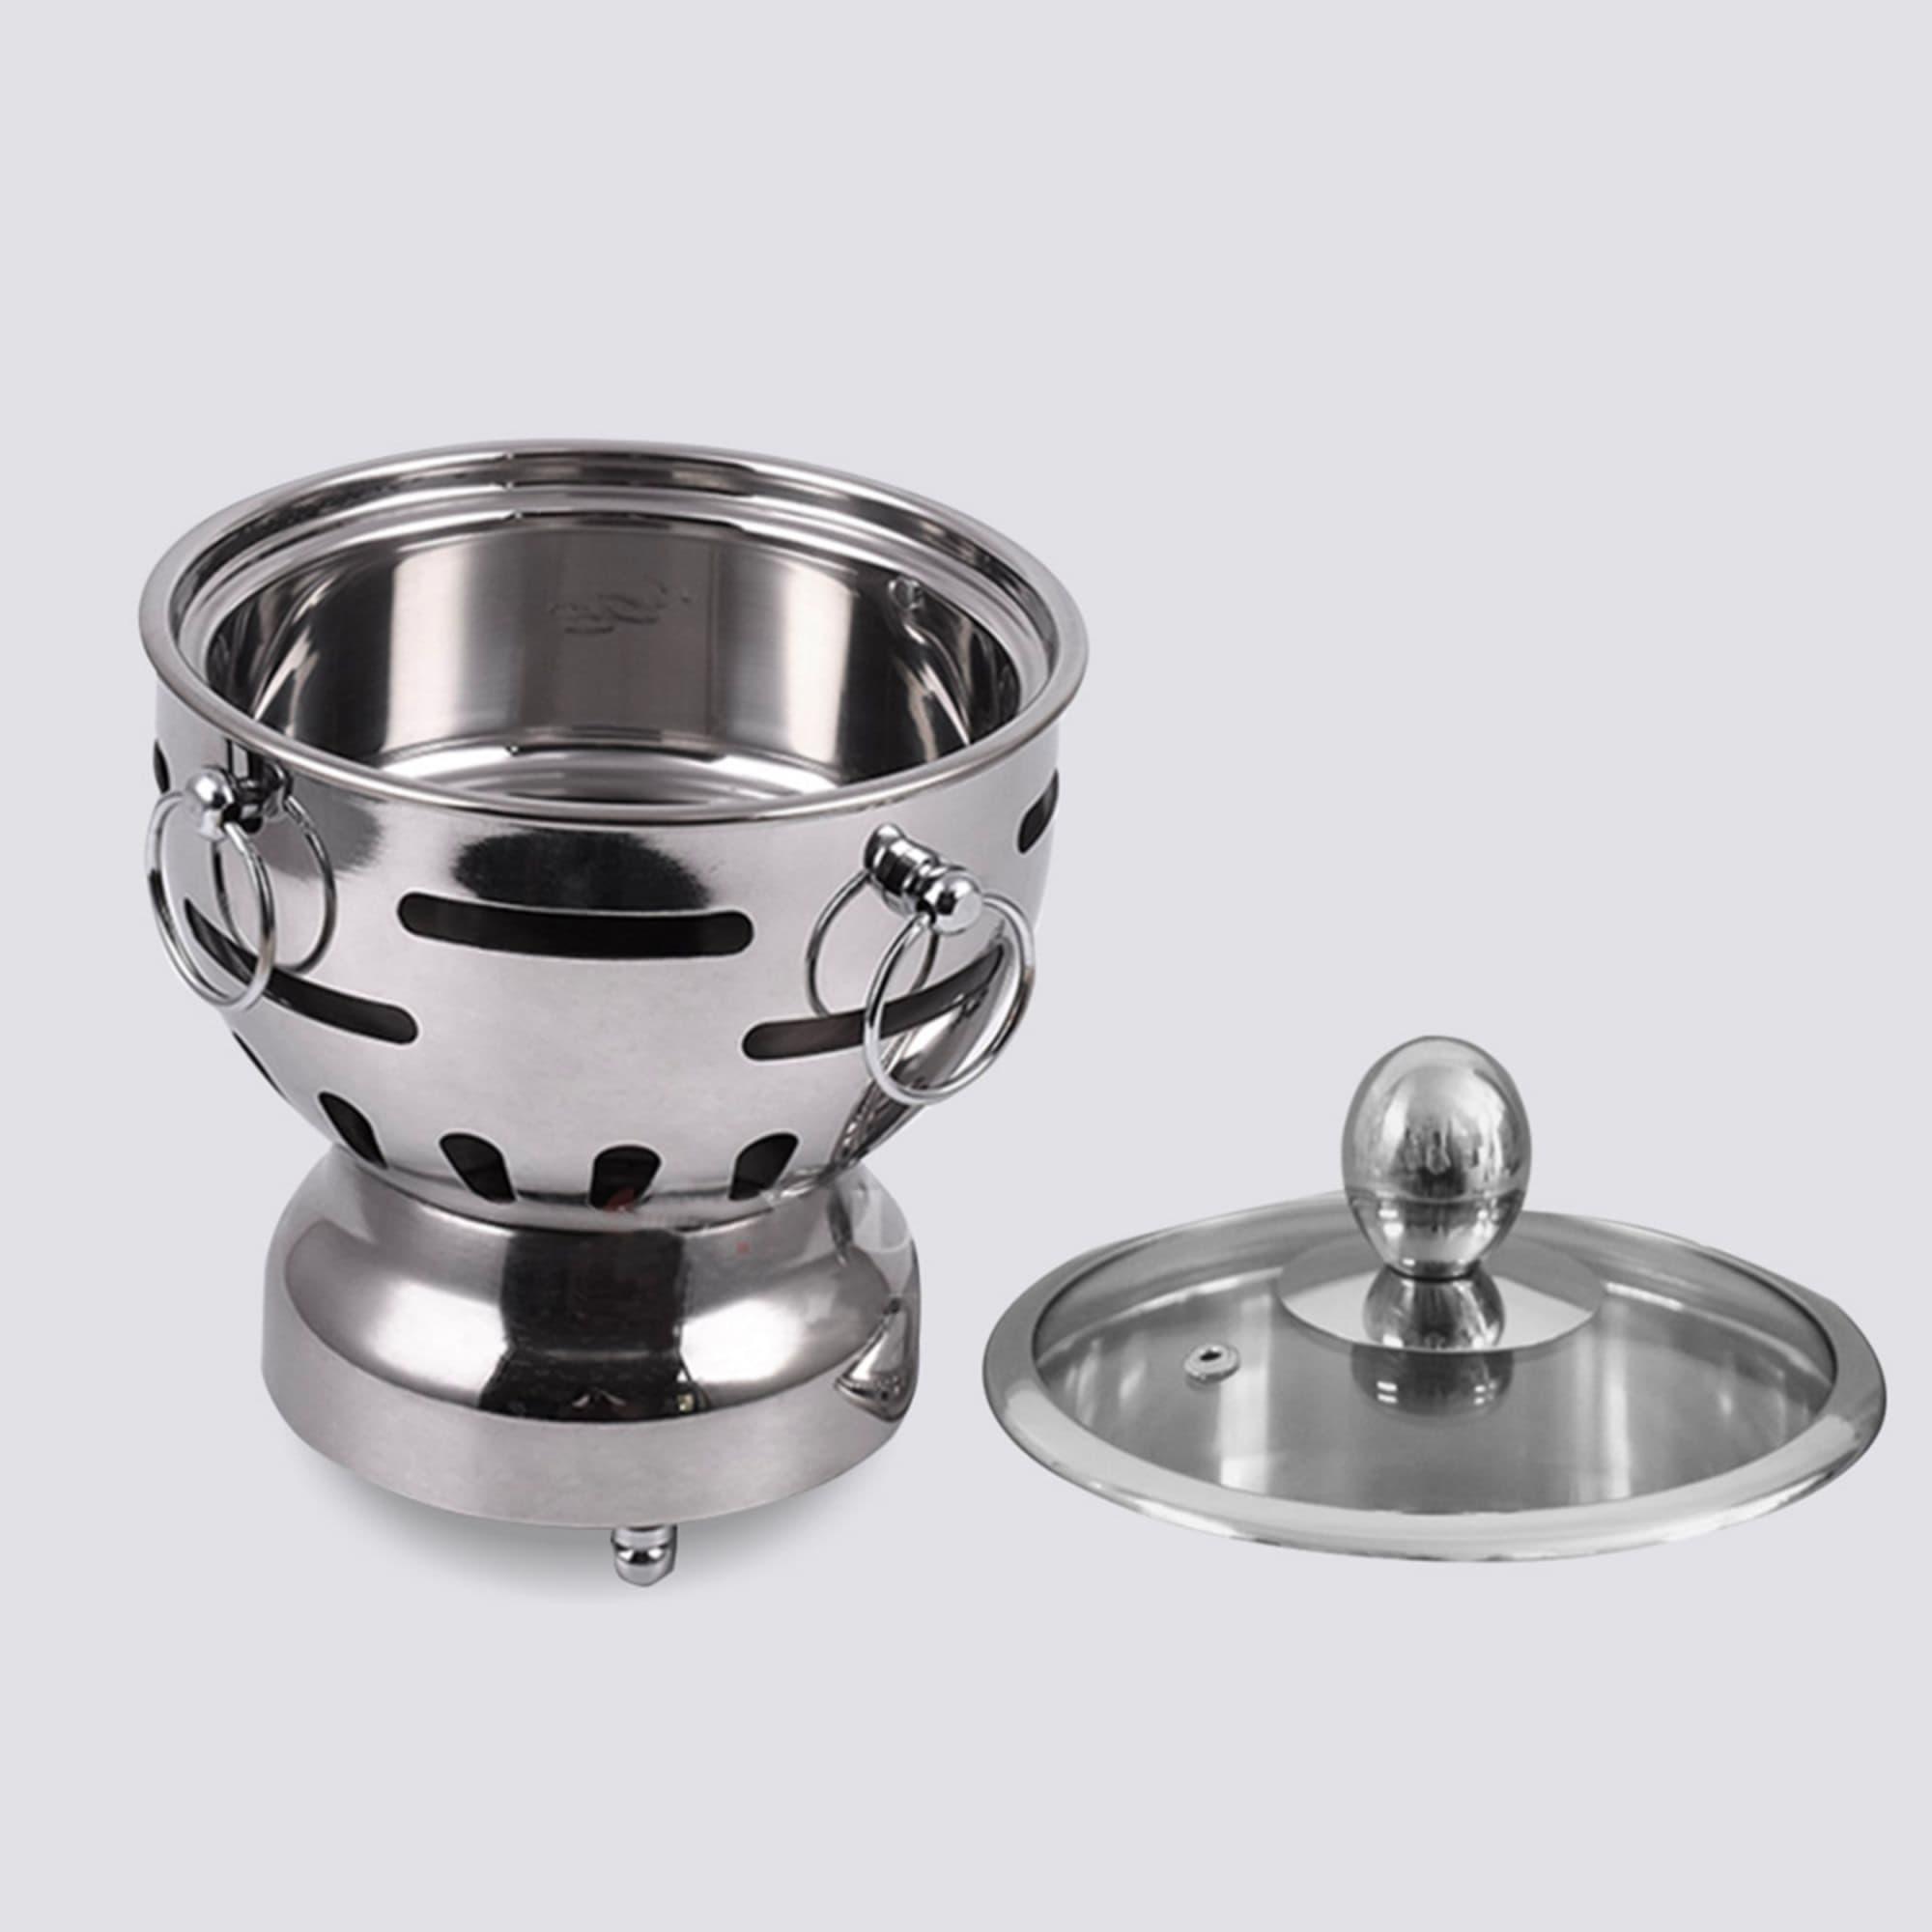 Soga Round Stainless Steel Single Hot Pot with Glass Lid 18.5cm Set of 2 Image 6